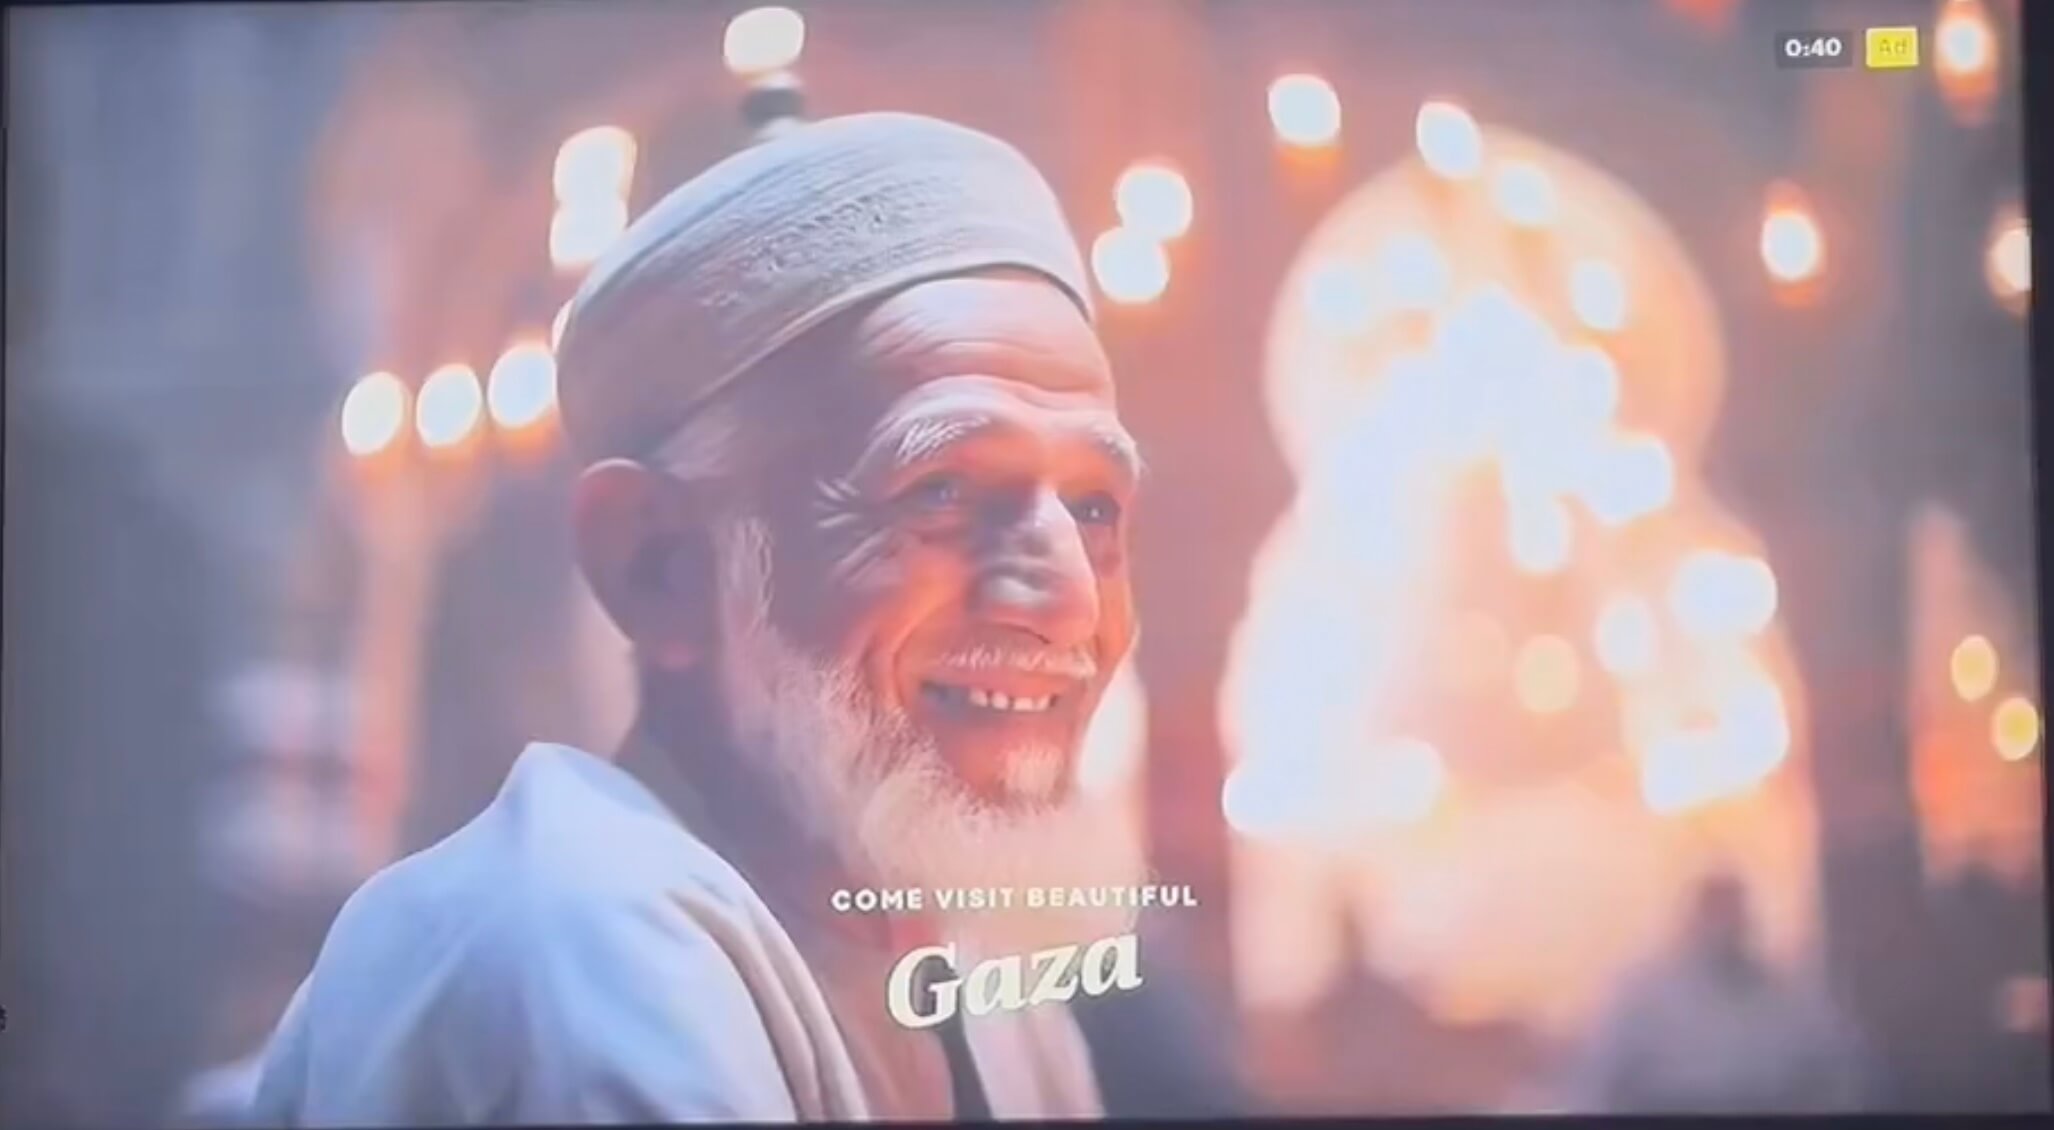 An ad on Hulu showcased an imaginary Gaza full of DJs, hotels and smiling people.